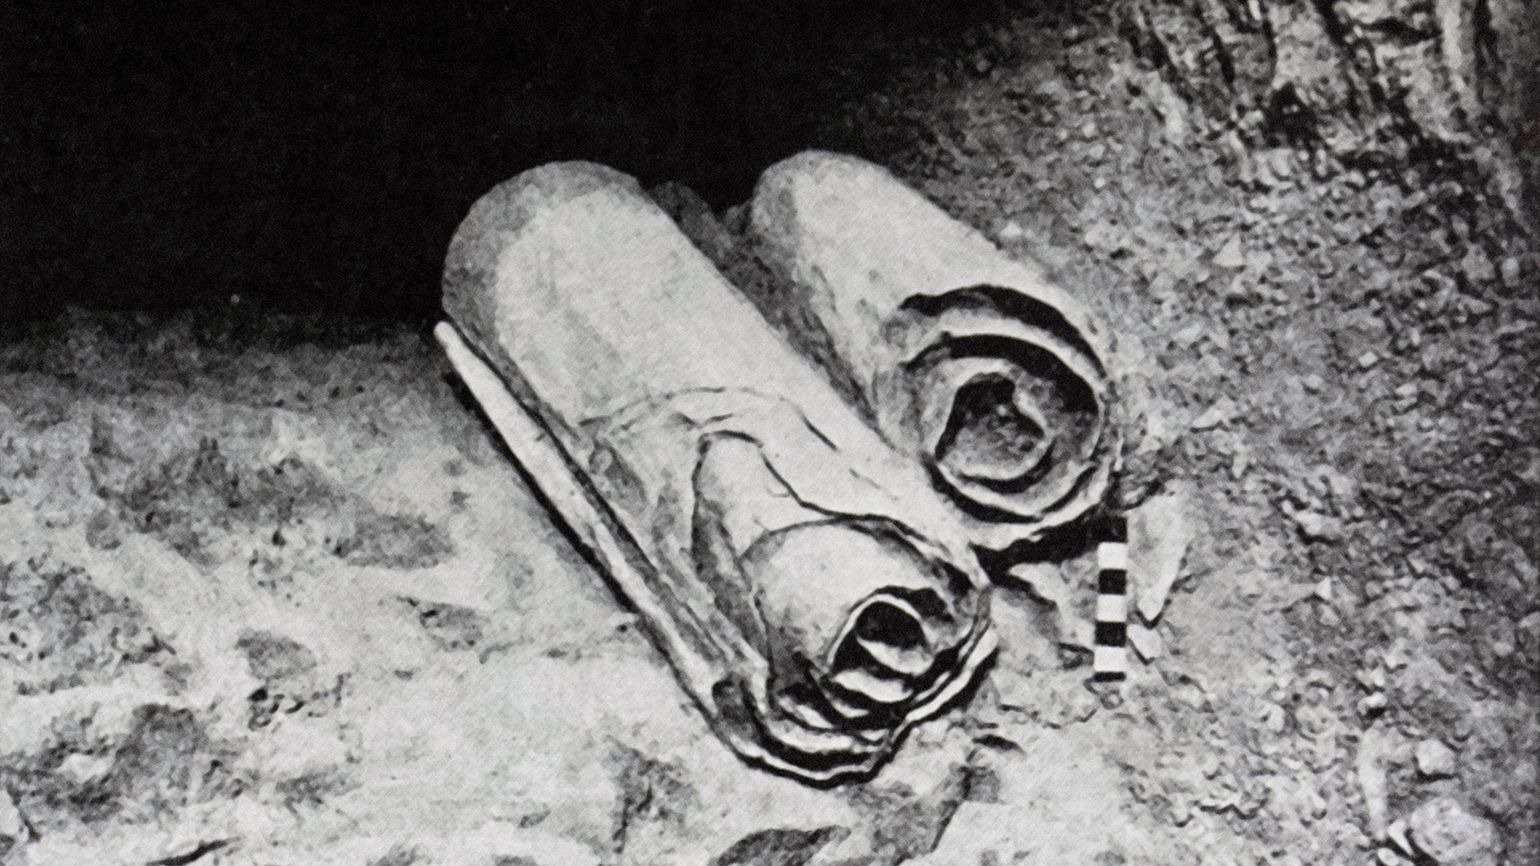 A pair of scrolls found in the caves of Qumran, near the Dead Sea in Israel